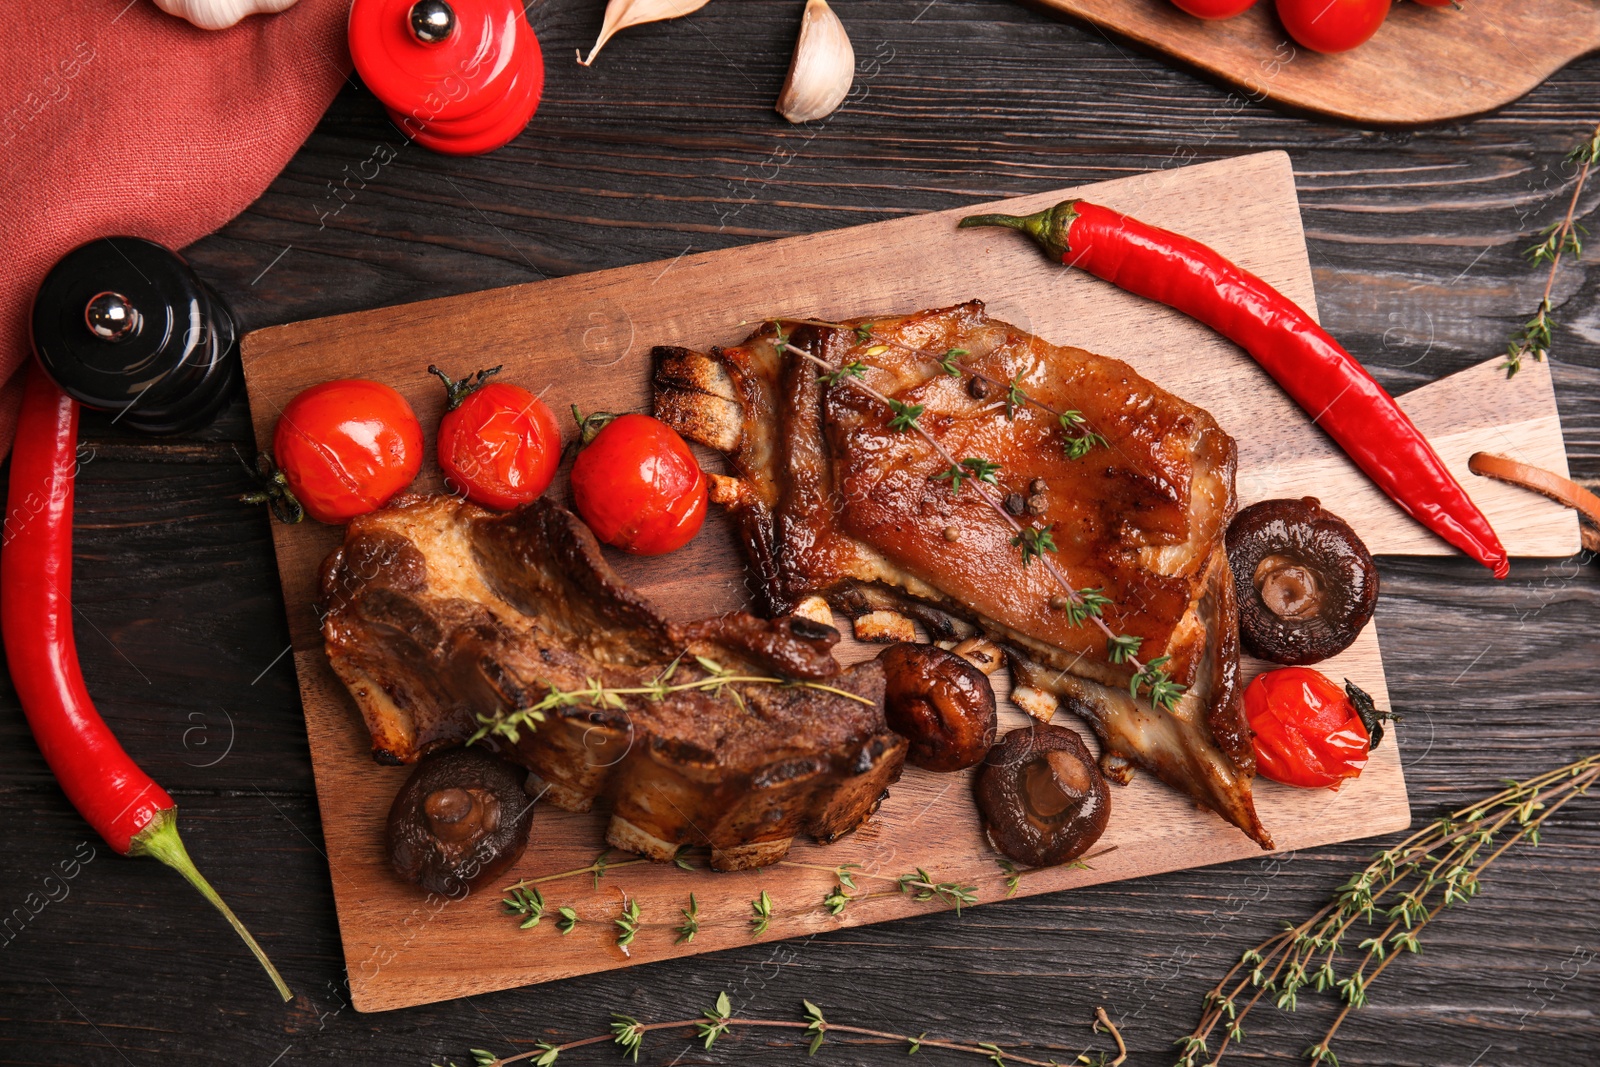 Photo of Delicious roasted ribs served on black wooden table, flat lay